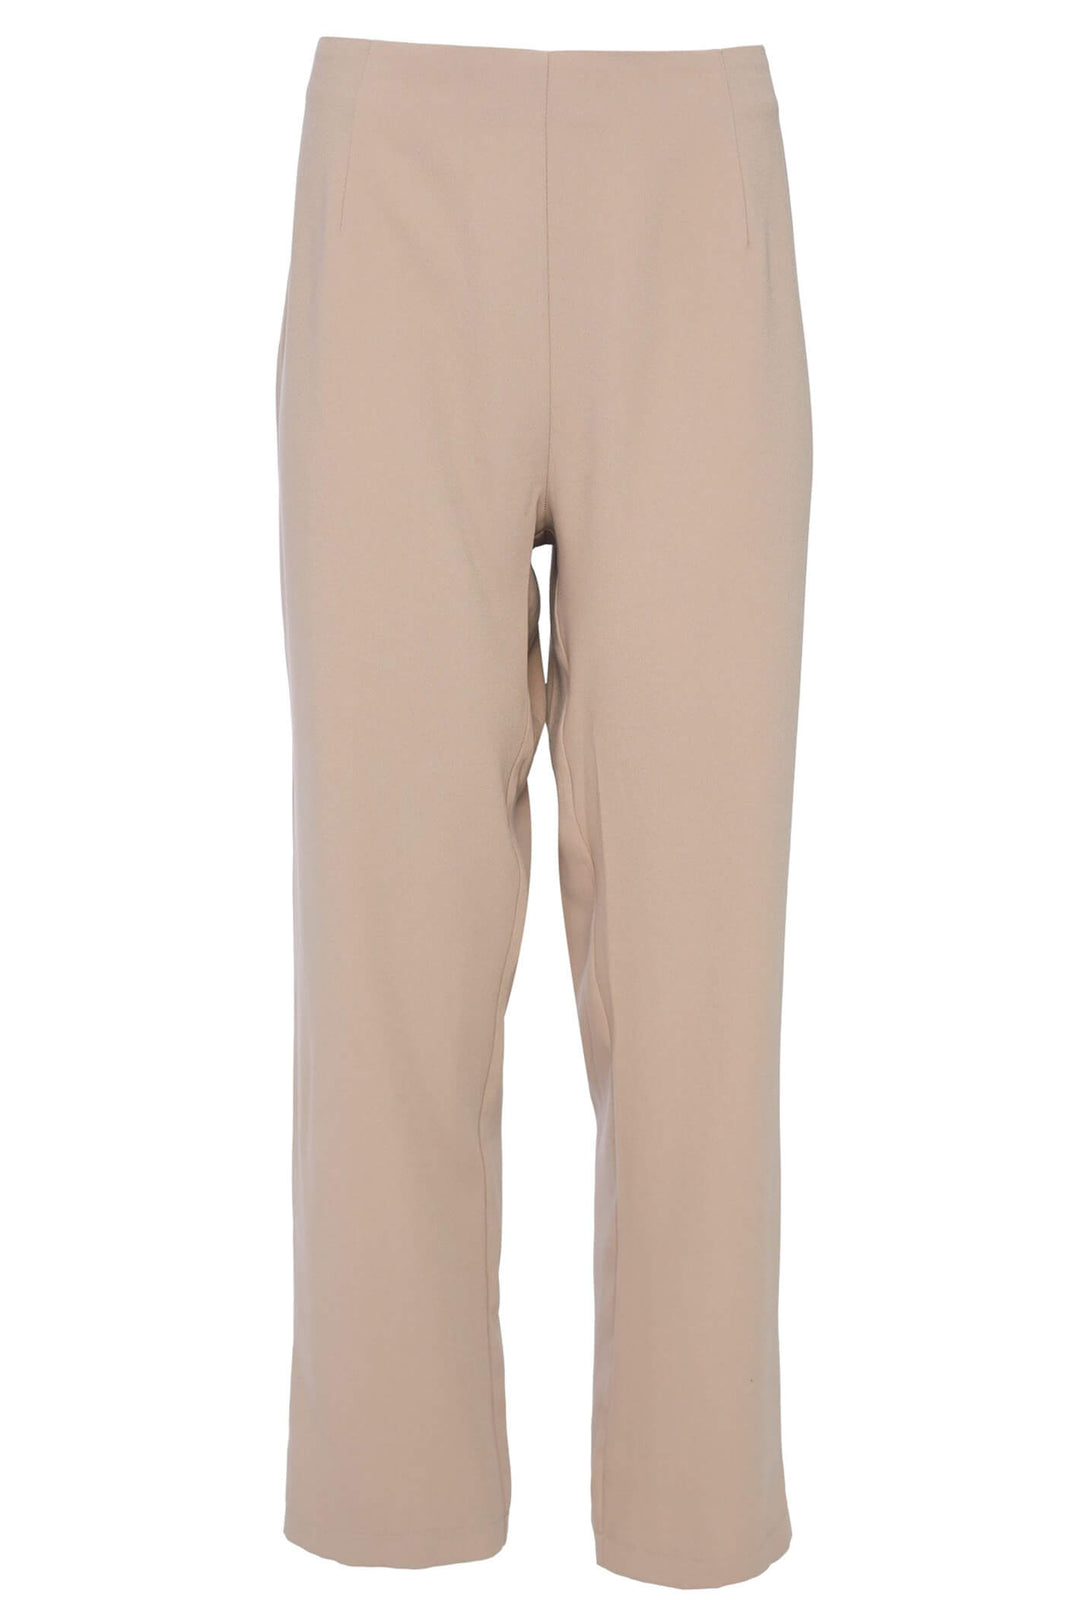 Ora ORS23 170 Taupe Wide Leg Trousers - Experience Boutique